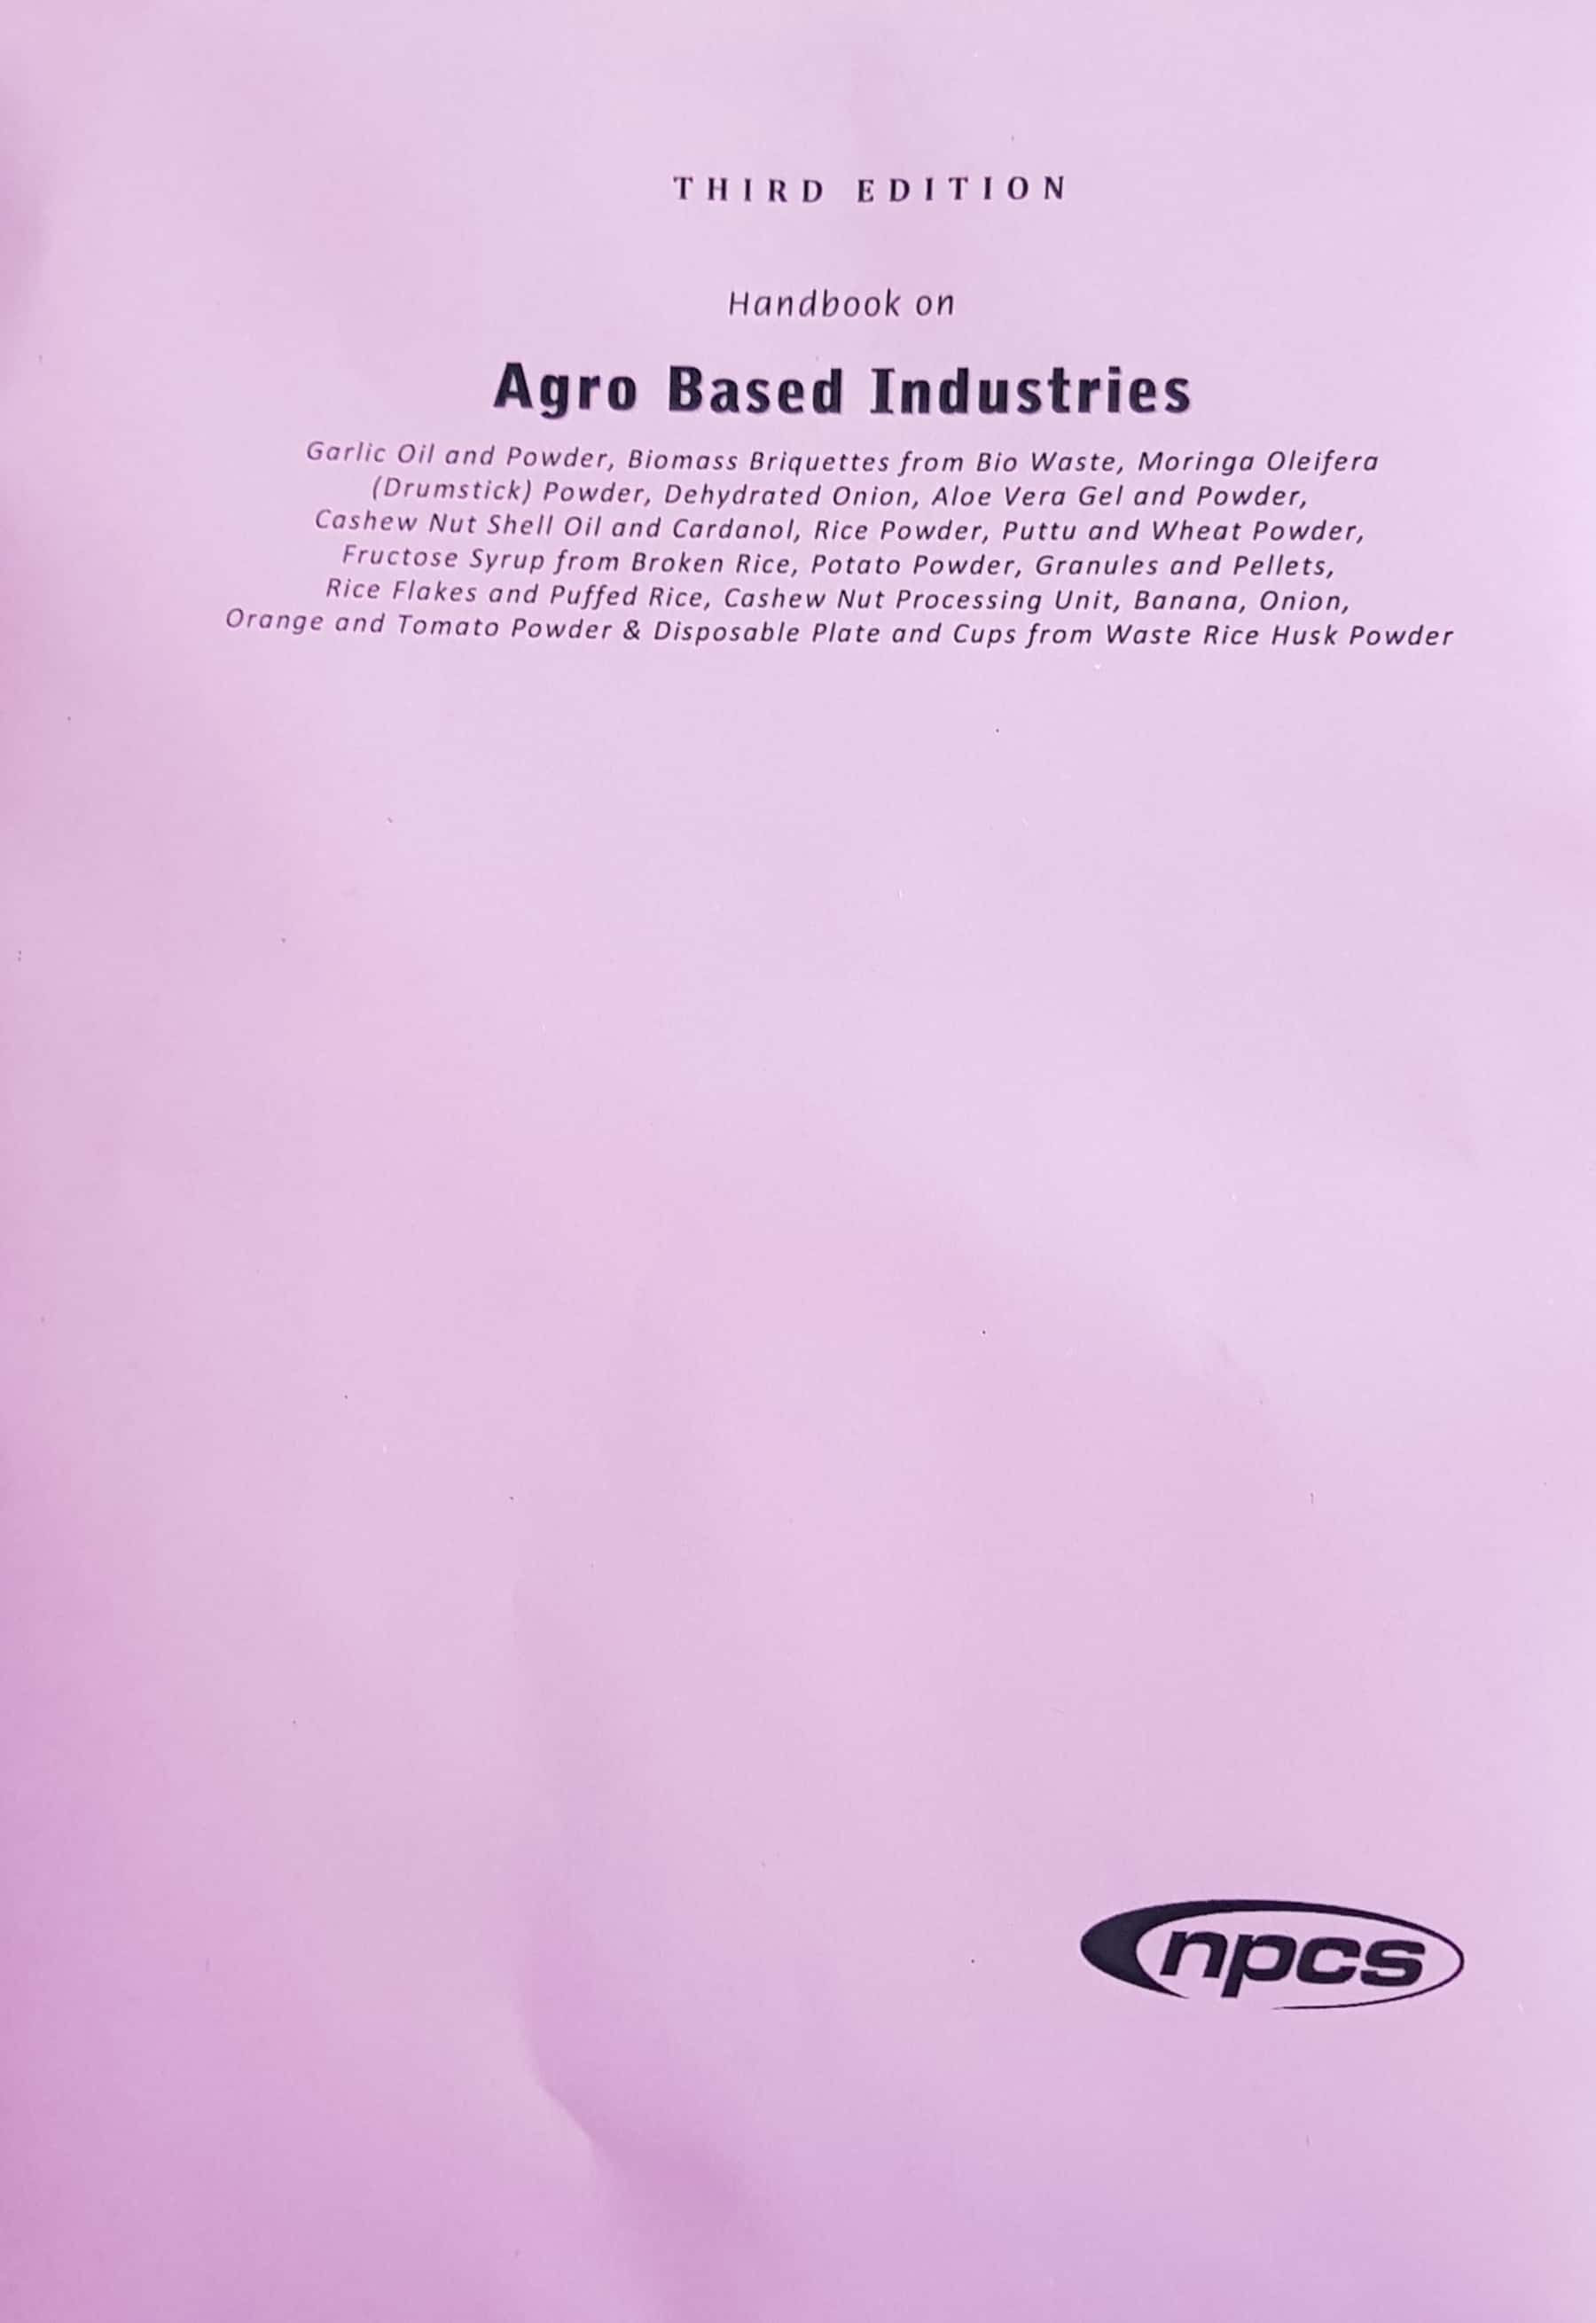 Handbook on Agro Based Industries (Garlic Oil and Powder, Biomass Briquettes from Bio Waste, Moringa Oleifera (Drumstick) Powder, Dehydrated Onion, Aloe Vera Gel and Powder,  Cashew Nut Shell Oil and Cardanol, Rice Powder, Puttu and Wheat Powder,  Fructose Syrup from Broken Rice, Potato Powder, Granules and Pellets,  Rice Flakes and Puffed Rice, Cashew Nut Processing Unit, Banana, Onion,  Orange and Tomato Powder & Disposable Plate and Cups from Waste Rice Husk Powder) (3rd Edition)